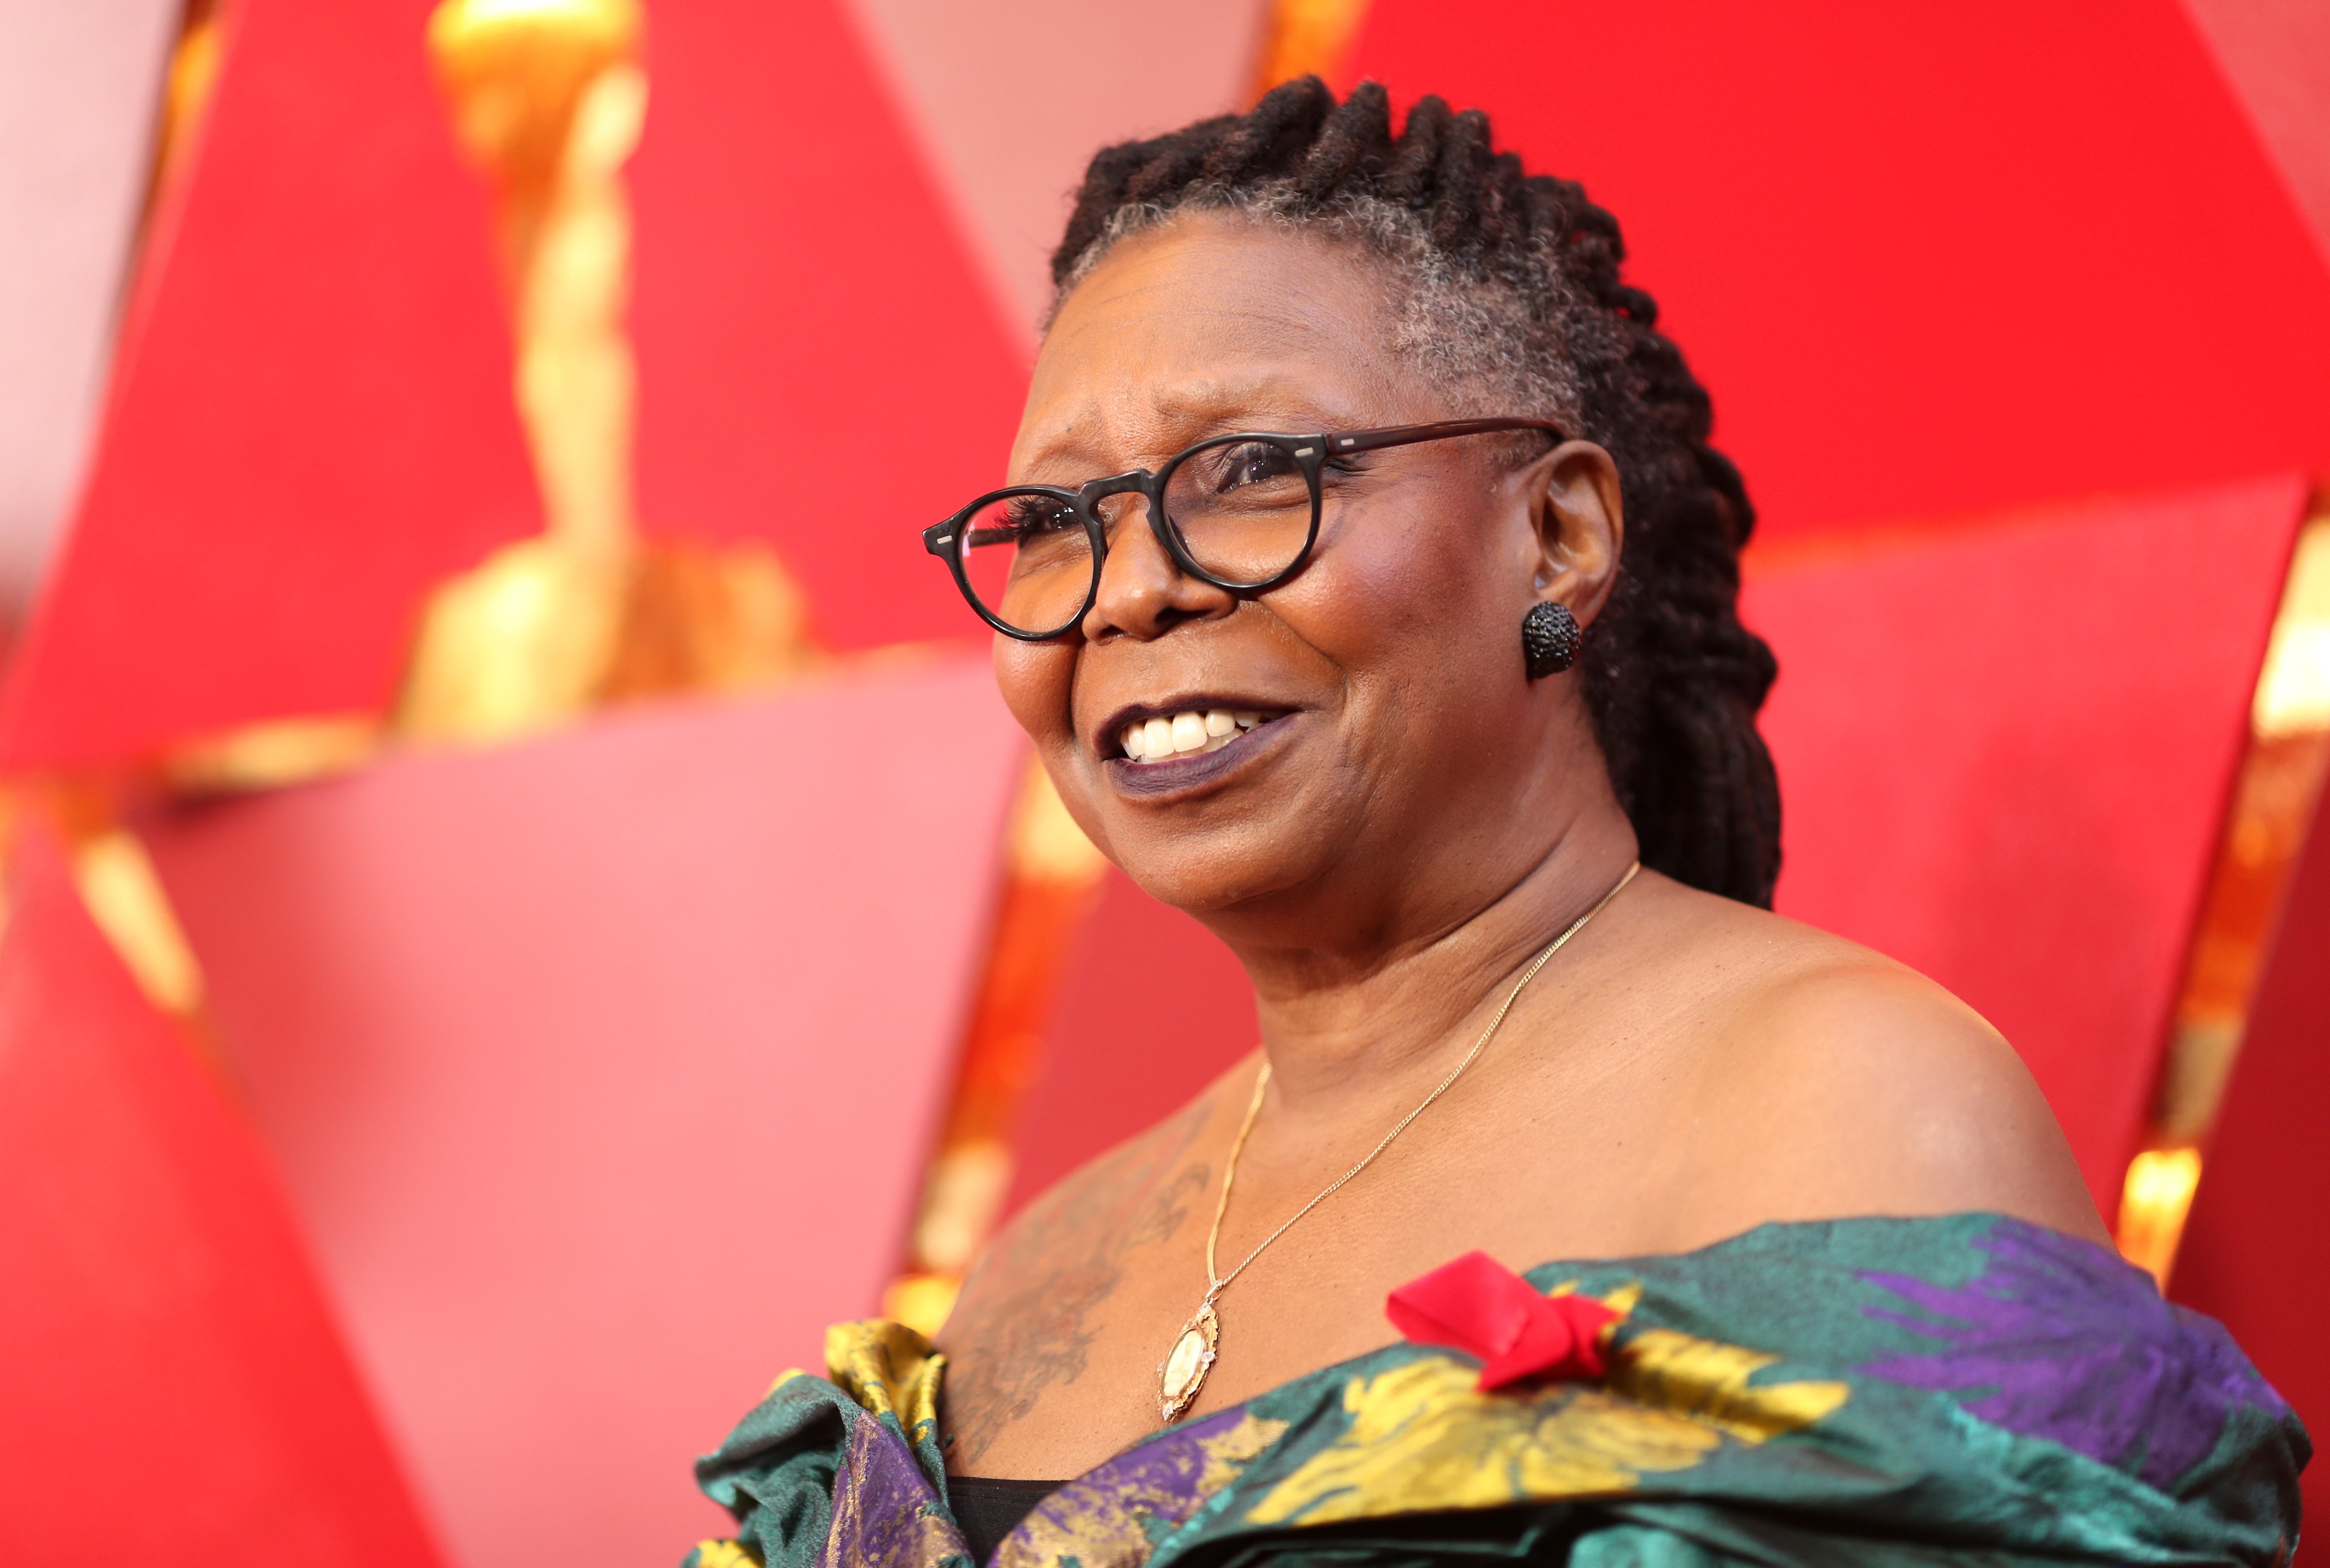 Whoopi Goldberg received mixed emotions from fans for her return to Blue Bloods. | Photo: Getty Images